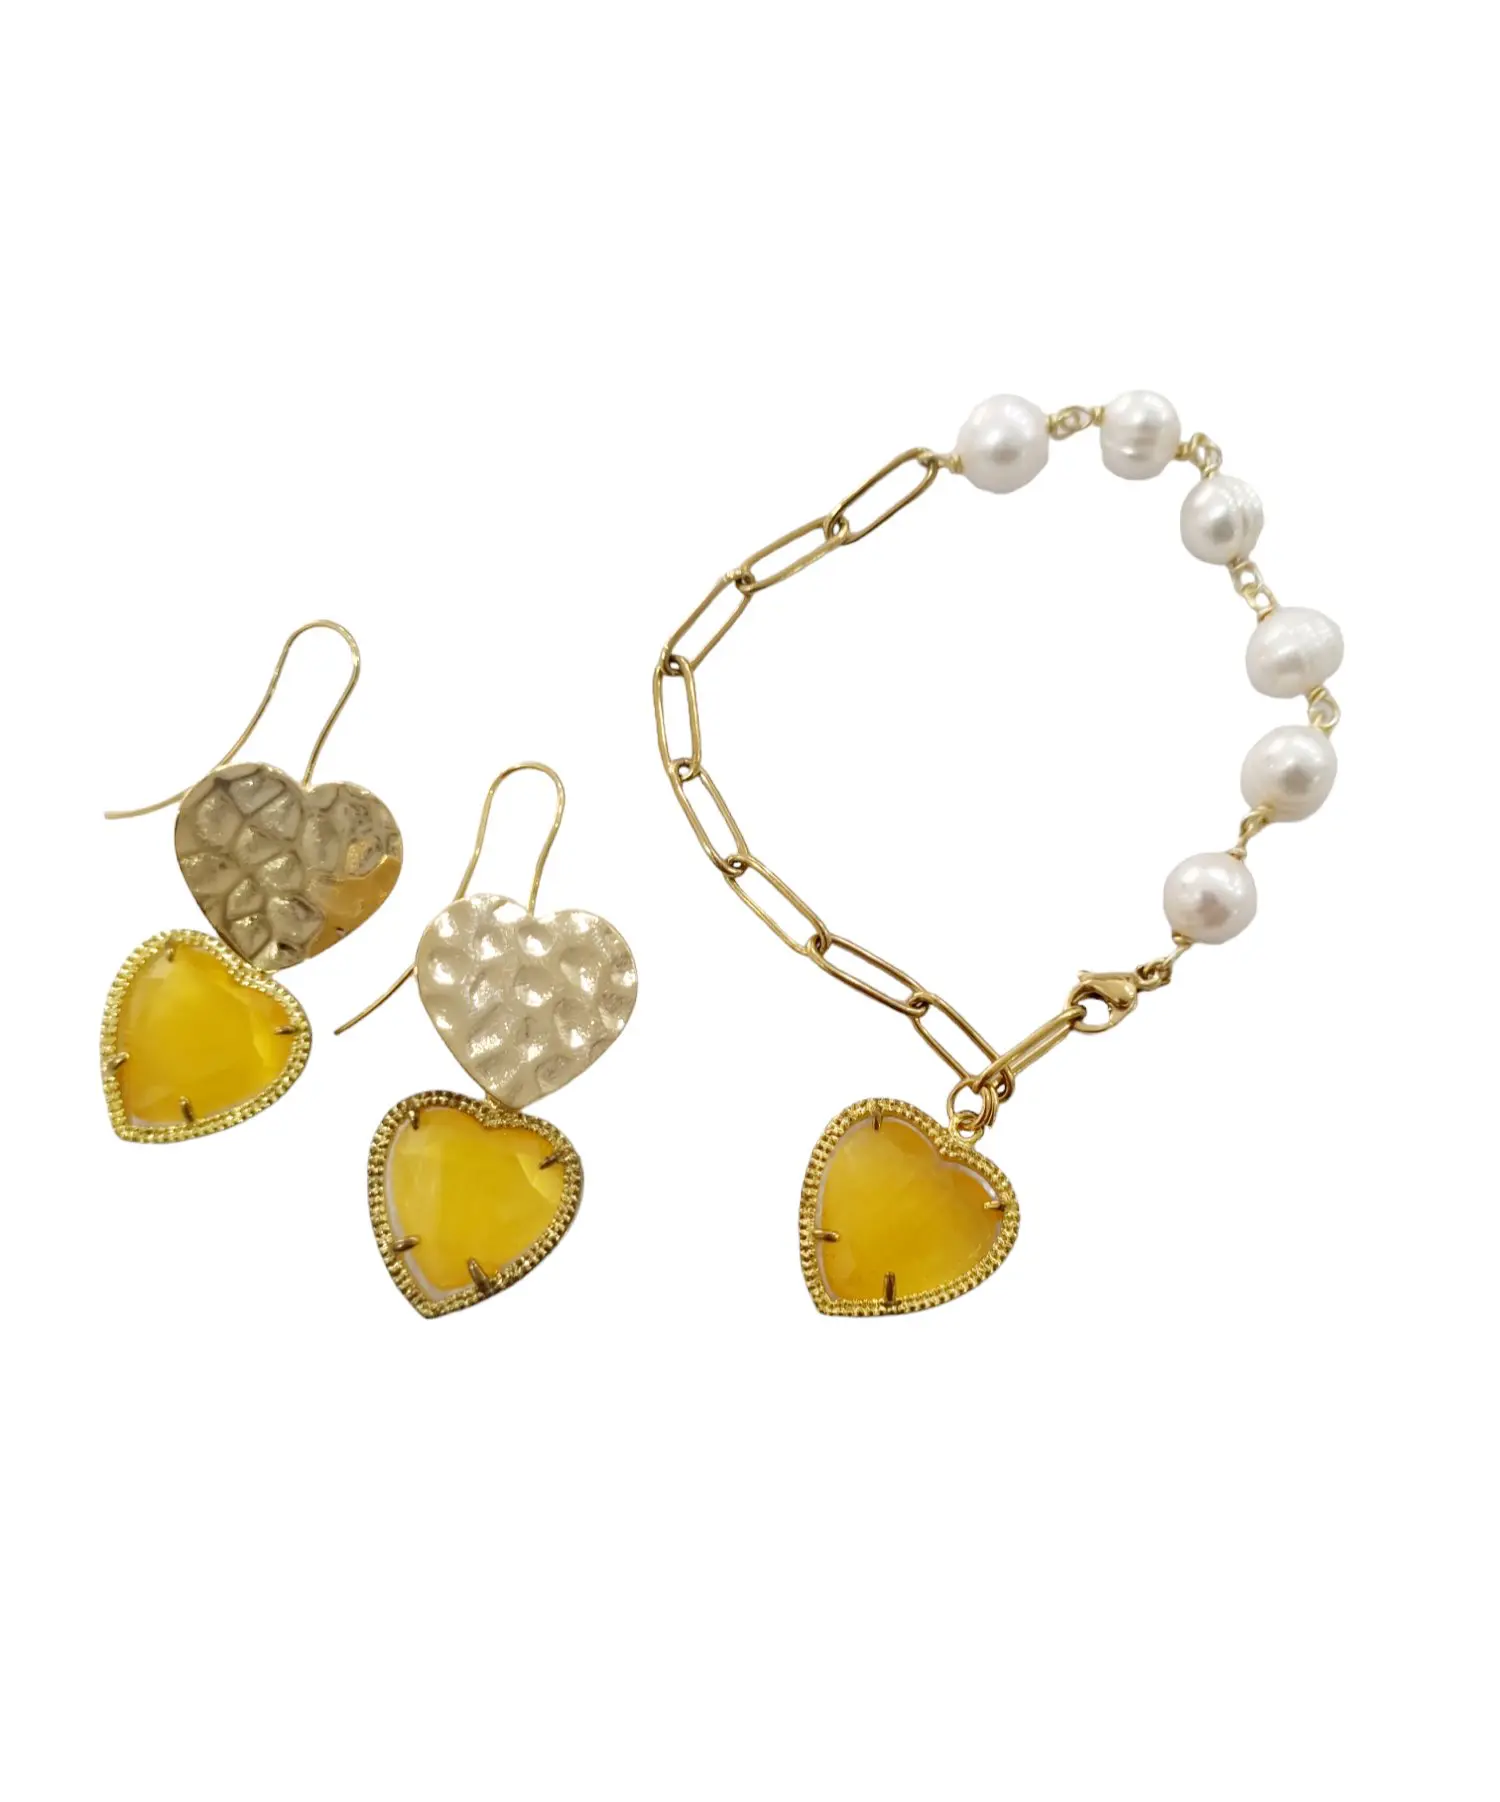 Heart bracelet and earring set with yellow cat's eye heart set in brass, freshwater pearls and steelBracelet length 18 cmEarring length 5cmEarring weight 4.8g